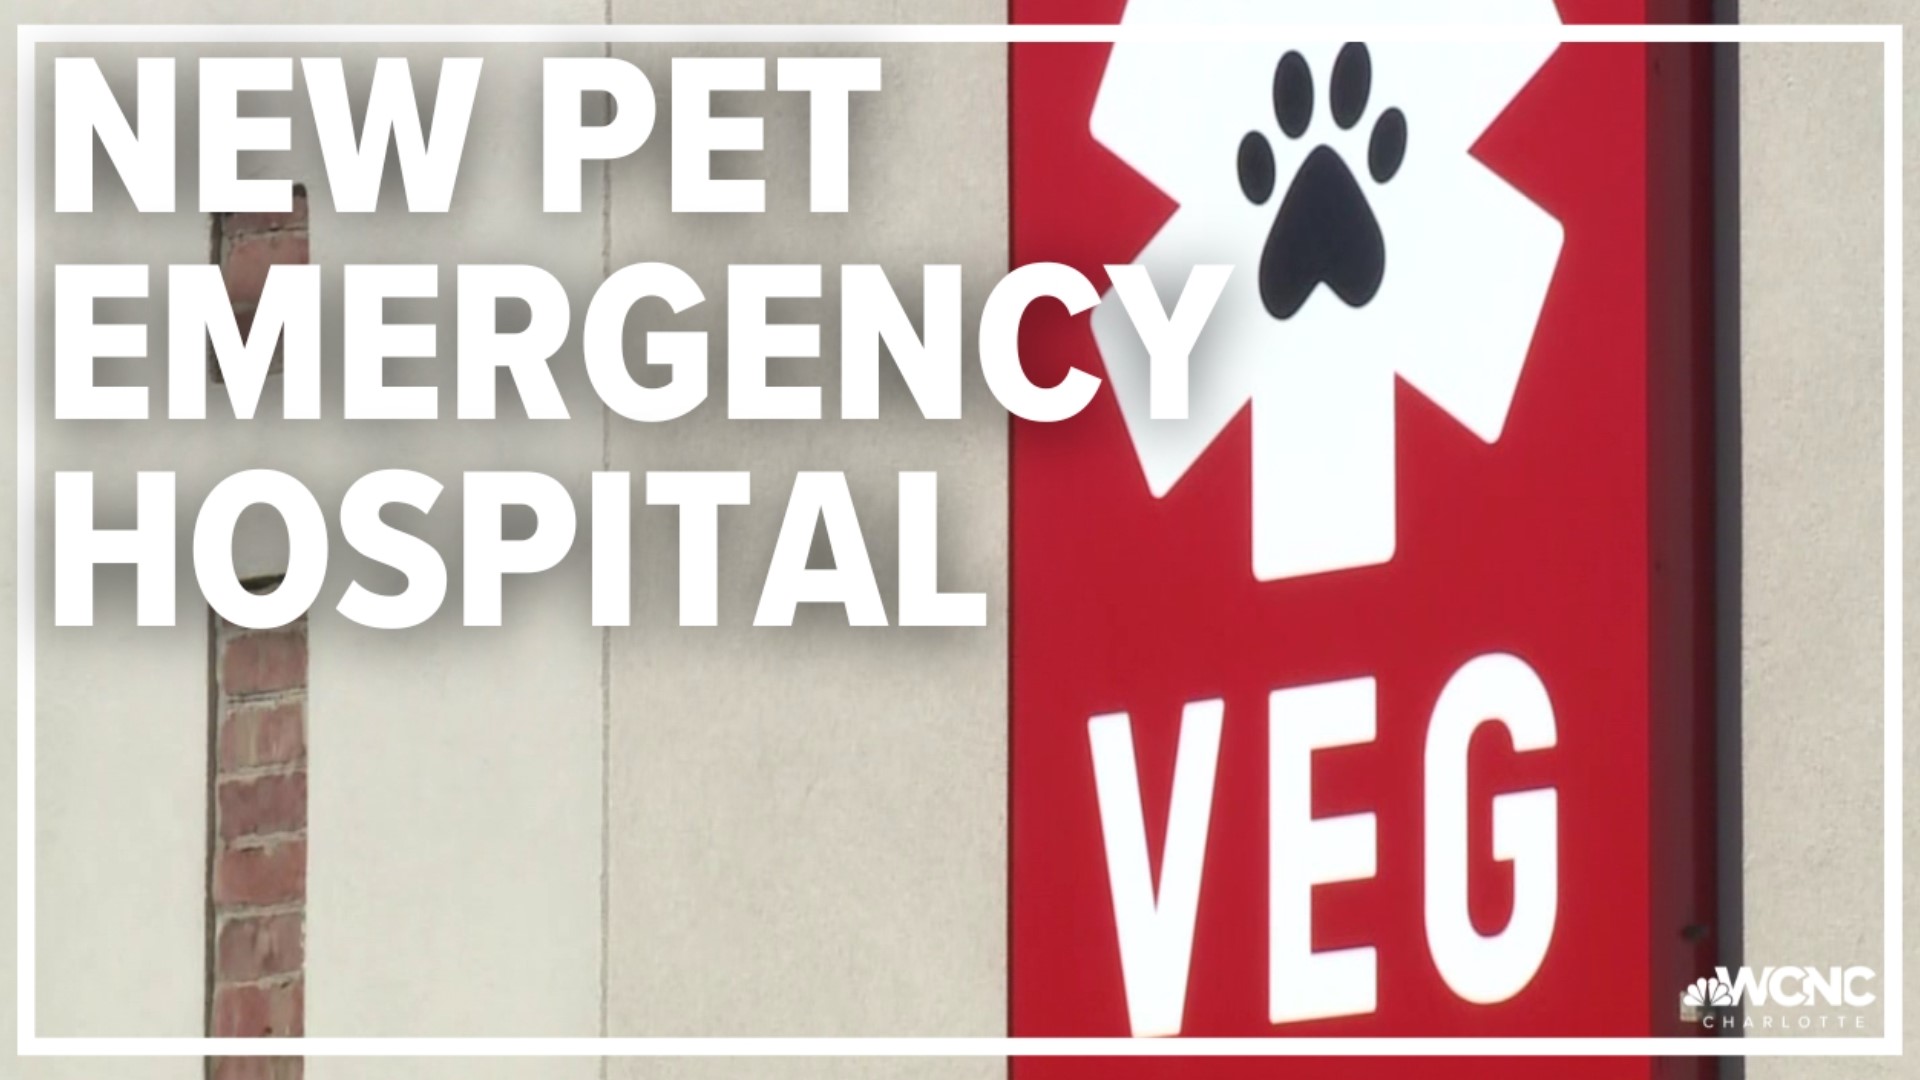 Veterinary Emergency Group has just opened its newest hospital in Charlotte. This will be VEG’s 34th location nationwide.